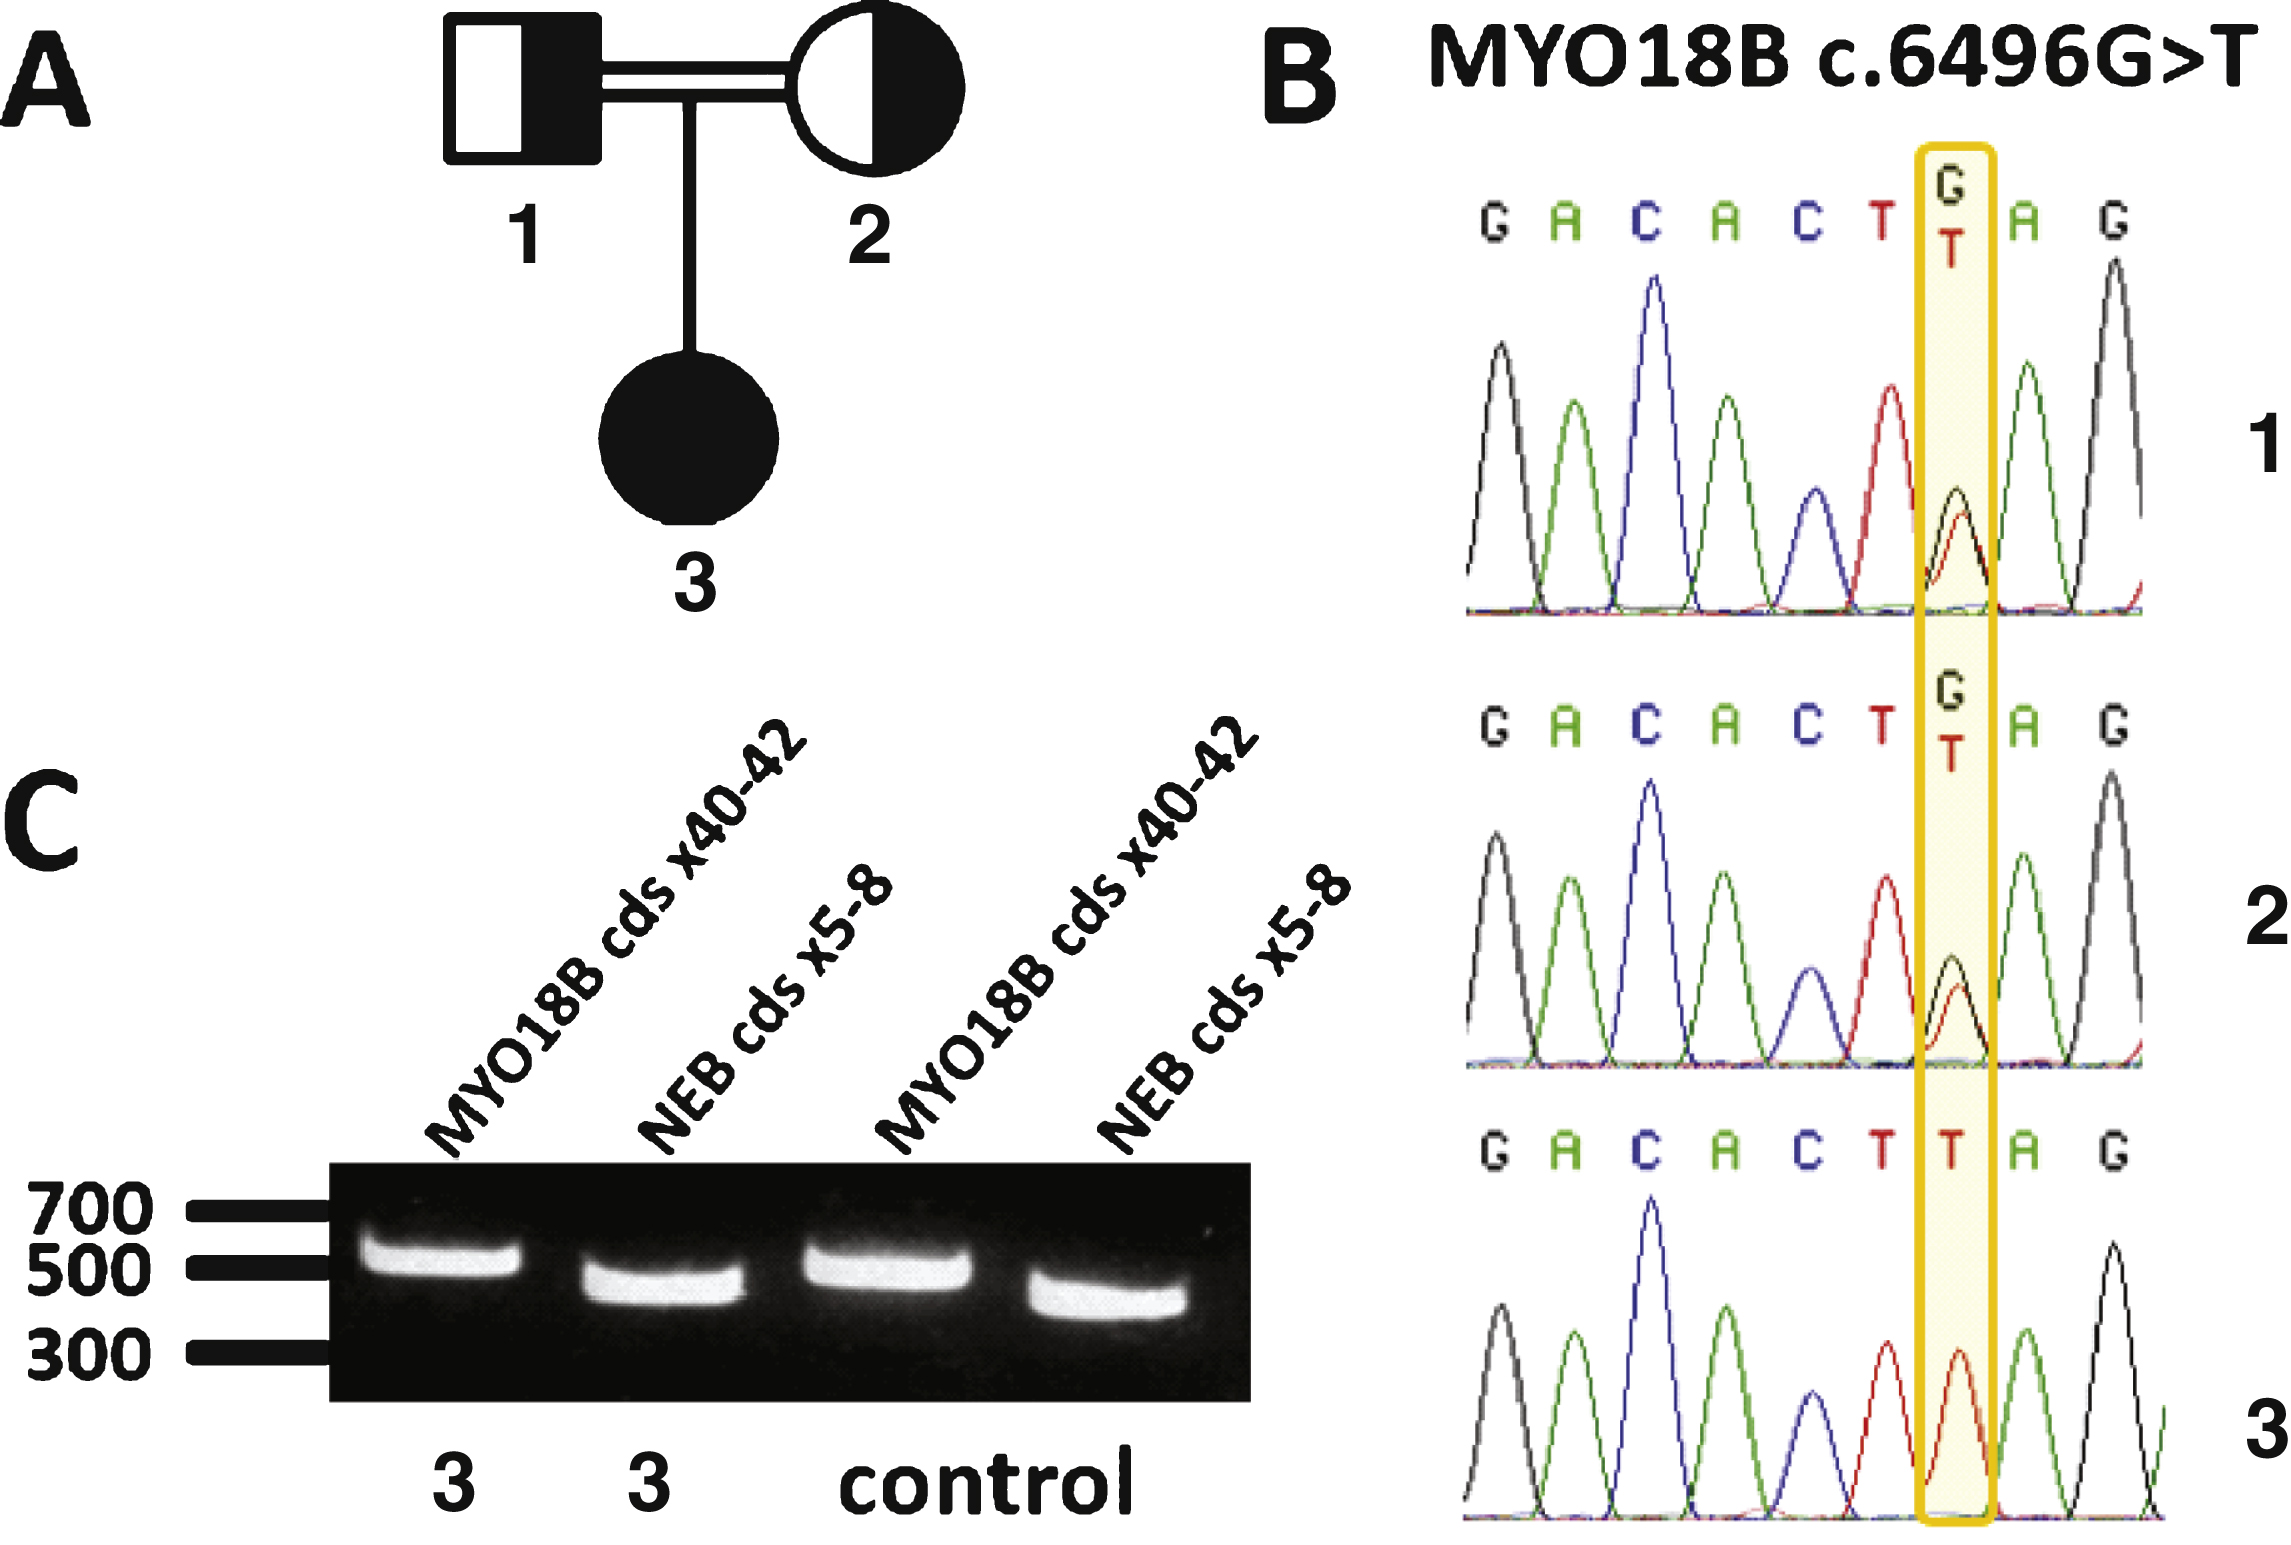 Identification of a homozygous nonsense mutation in MYO18B. A) Pedigree of the consanguineous family. B) Chromatopherograms showing the segregation of the MYO18B c.6496G>T mutation. Both healthy parents (1 and 2) are heterozygous carriers of the MYO18B mutation; the patient (3) is homozygous. C) RT-PCR analysis of skeletal muscle cDNA. The MYO18B amplicon encompassing the MYO18B mutation was detected at comparable levels in the patient and an age-matched control. A NEB amplicon of similar size was used as internal control.